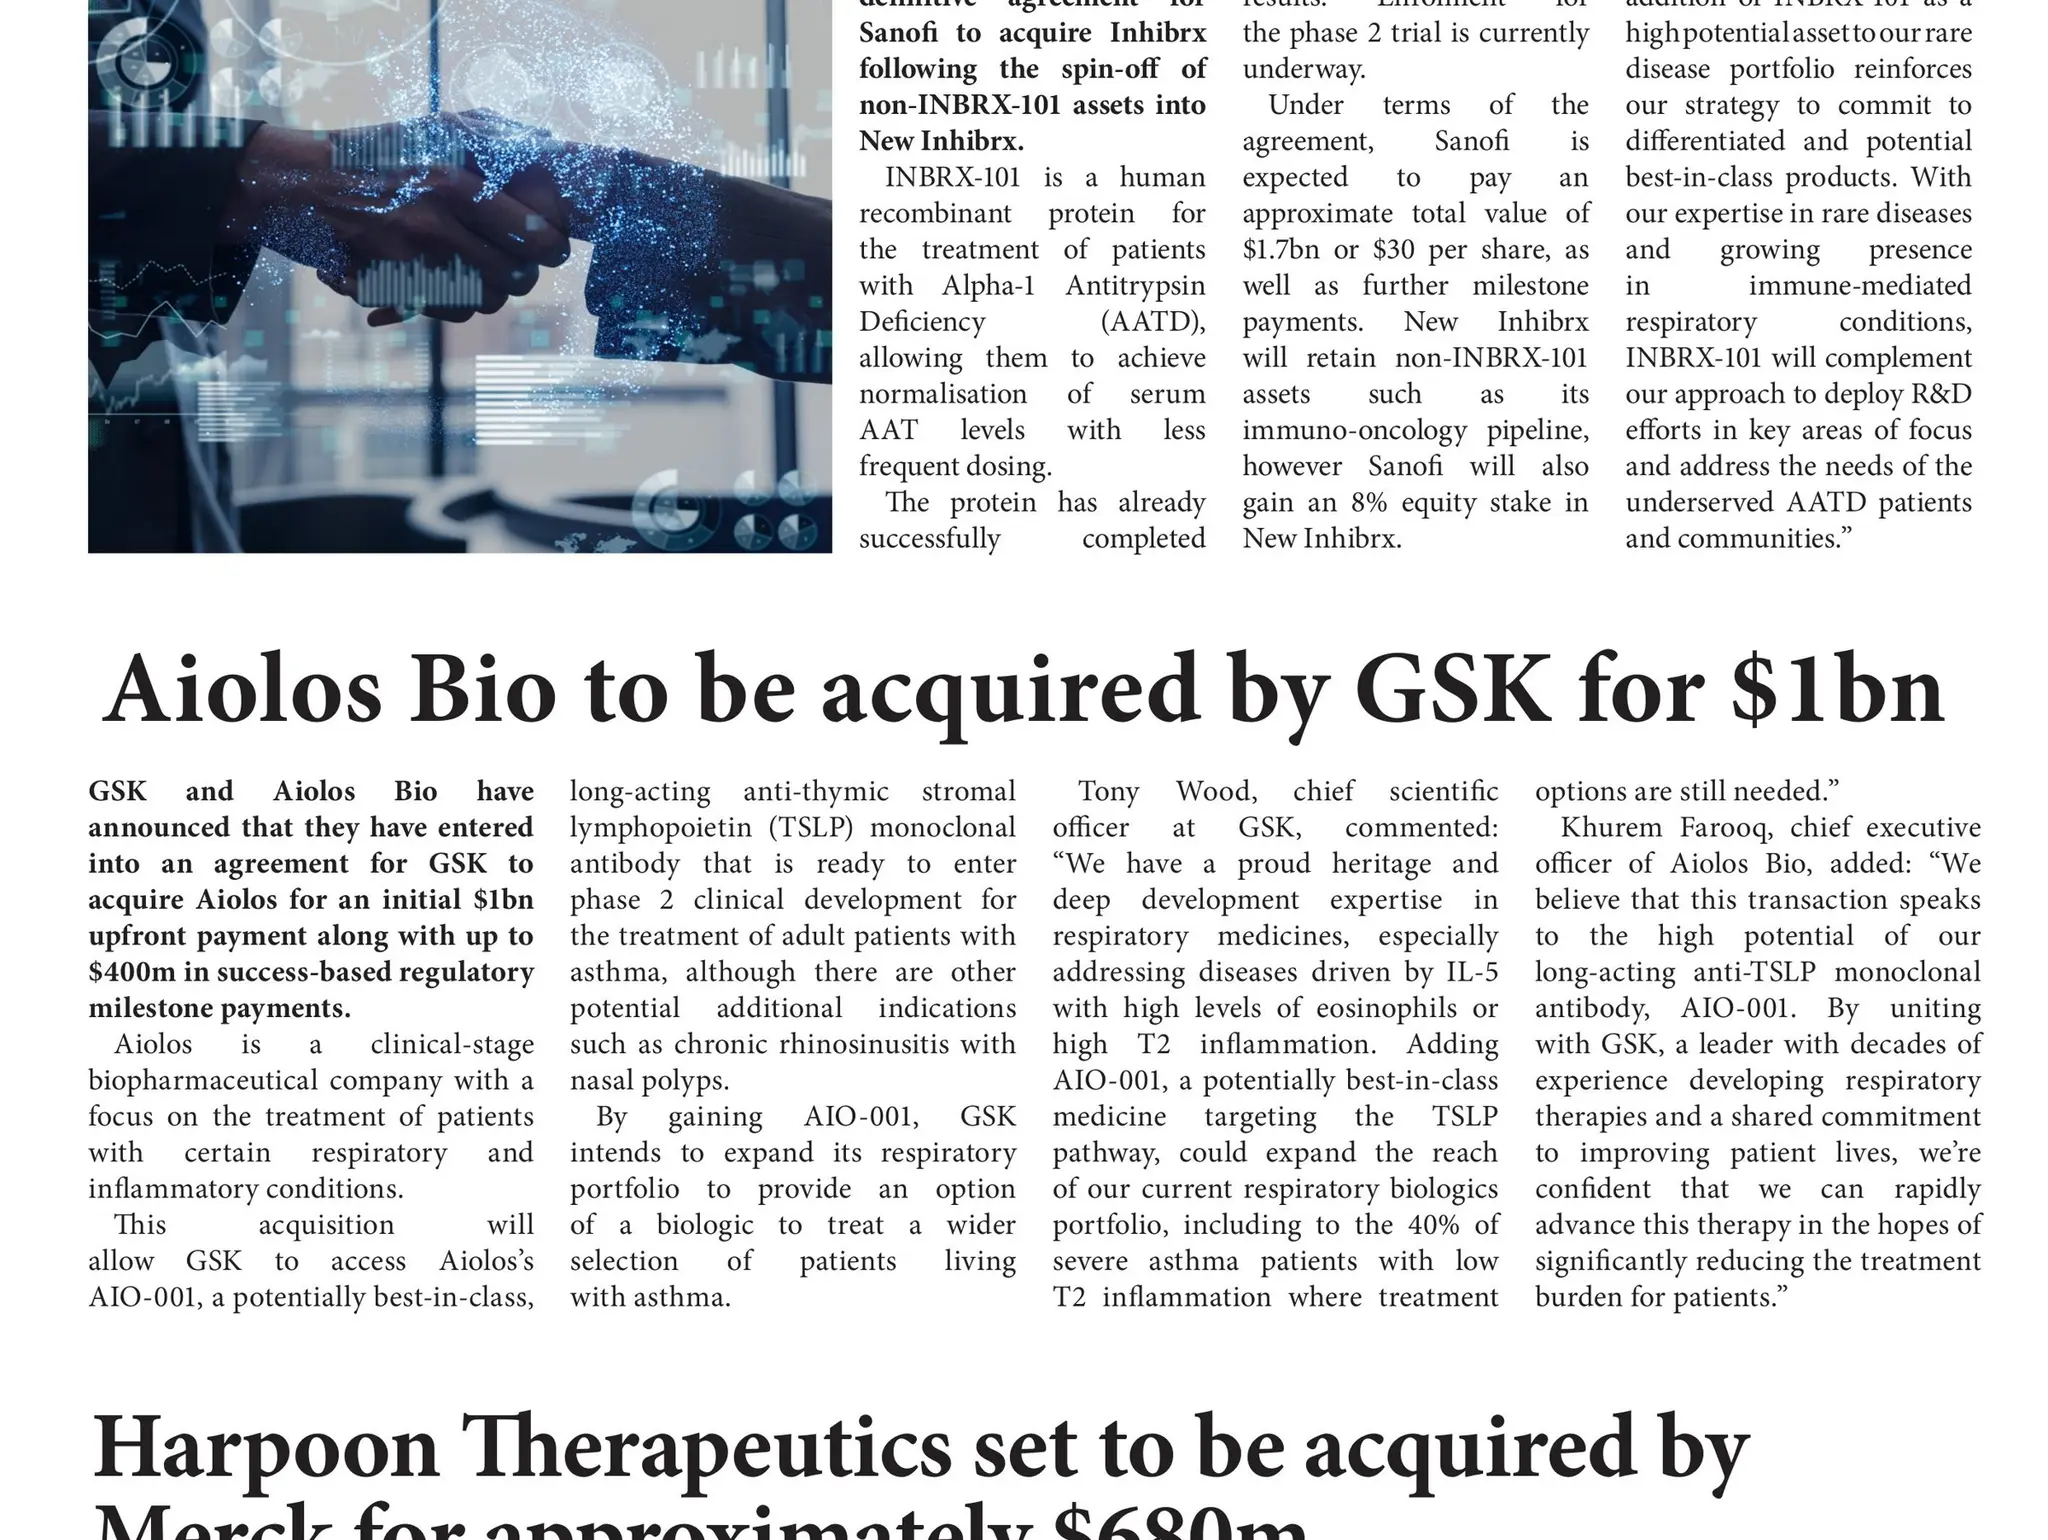 Aiolos Bio to be acquired by GSK for $1bn